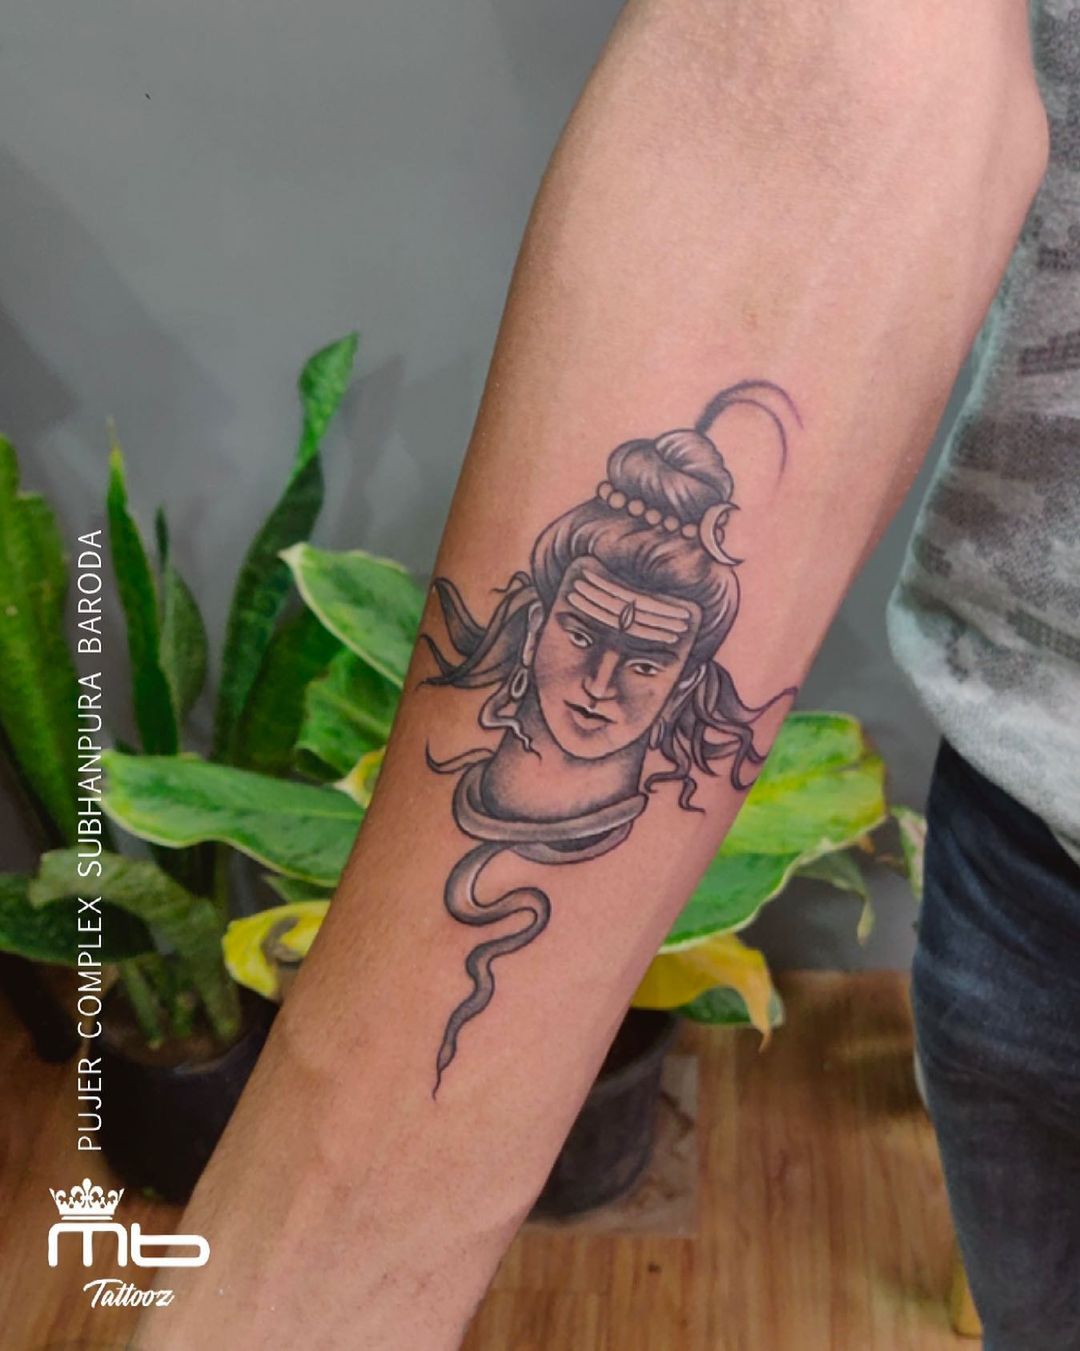 Discover more than 62 new tattoo shiva